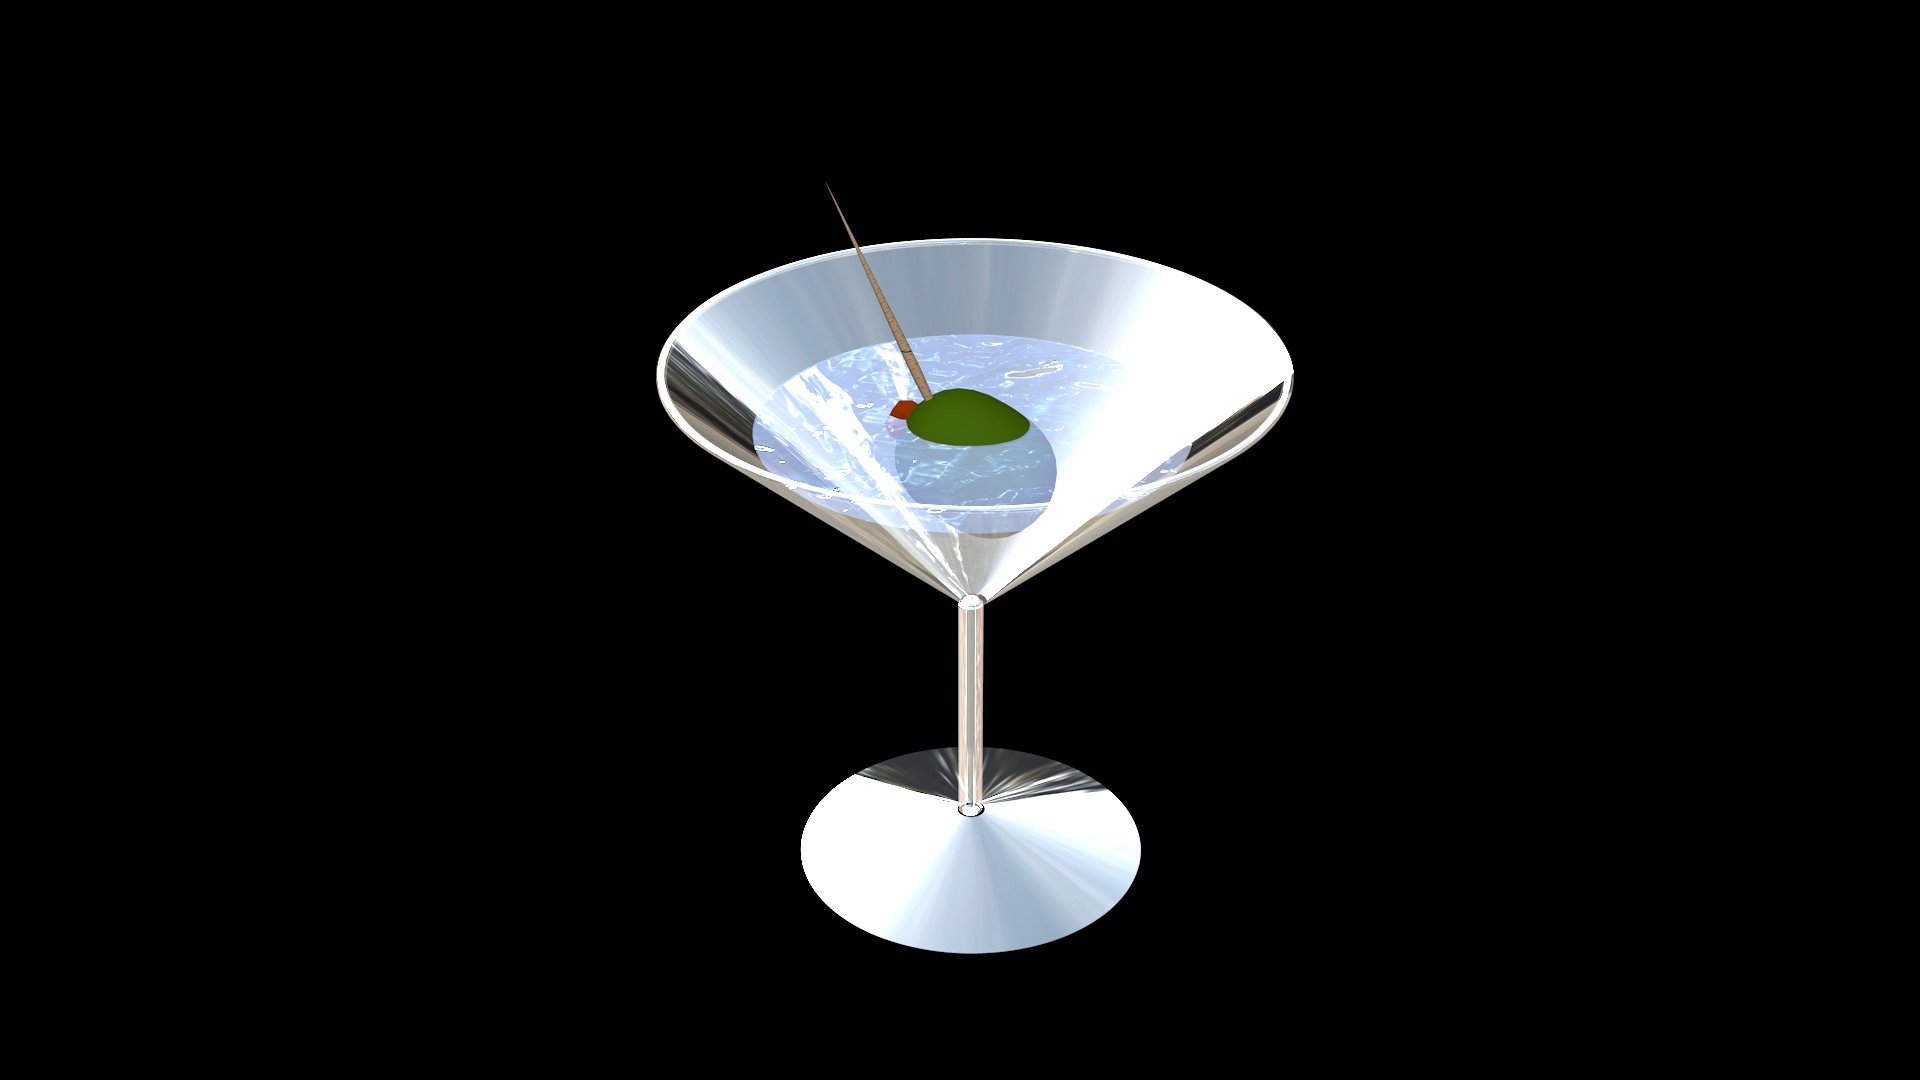 Martini - 3D Model made in Motion